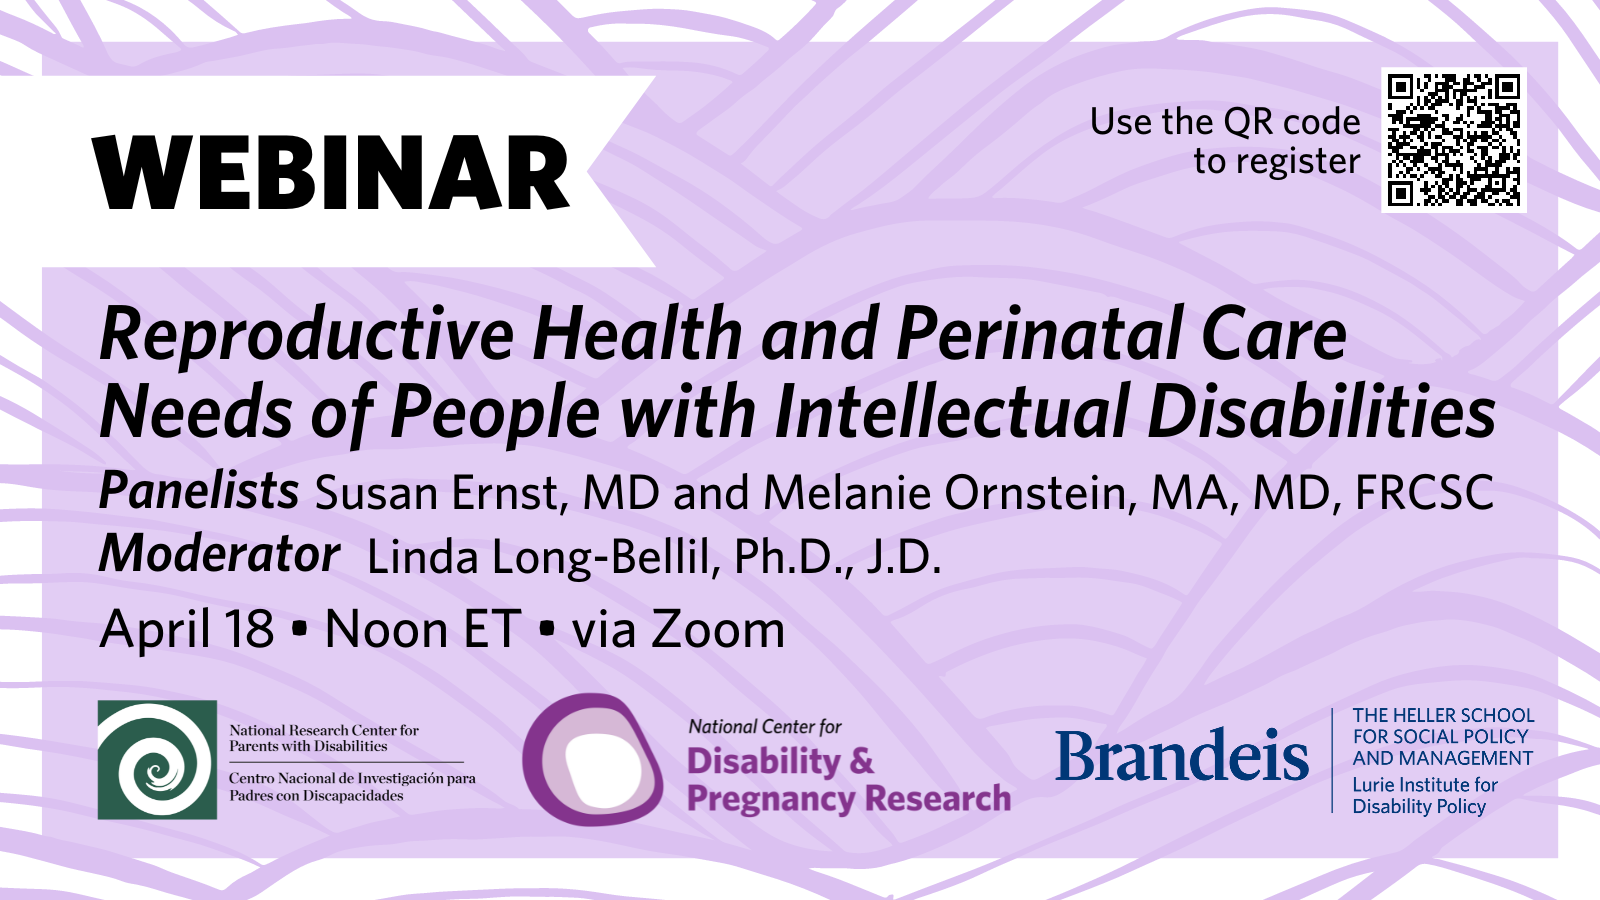 Reproductive Health and Perinatal Care Needs of People with Intellectual Disabilities webinar